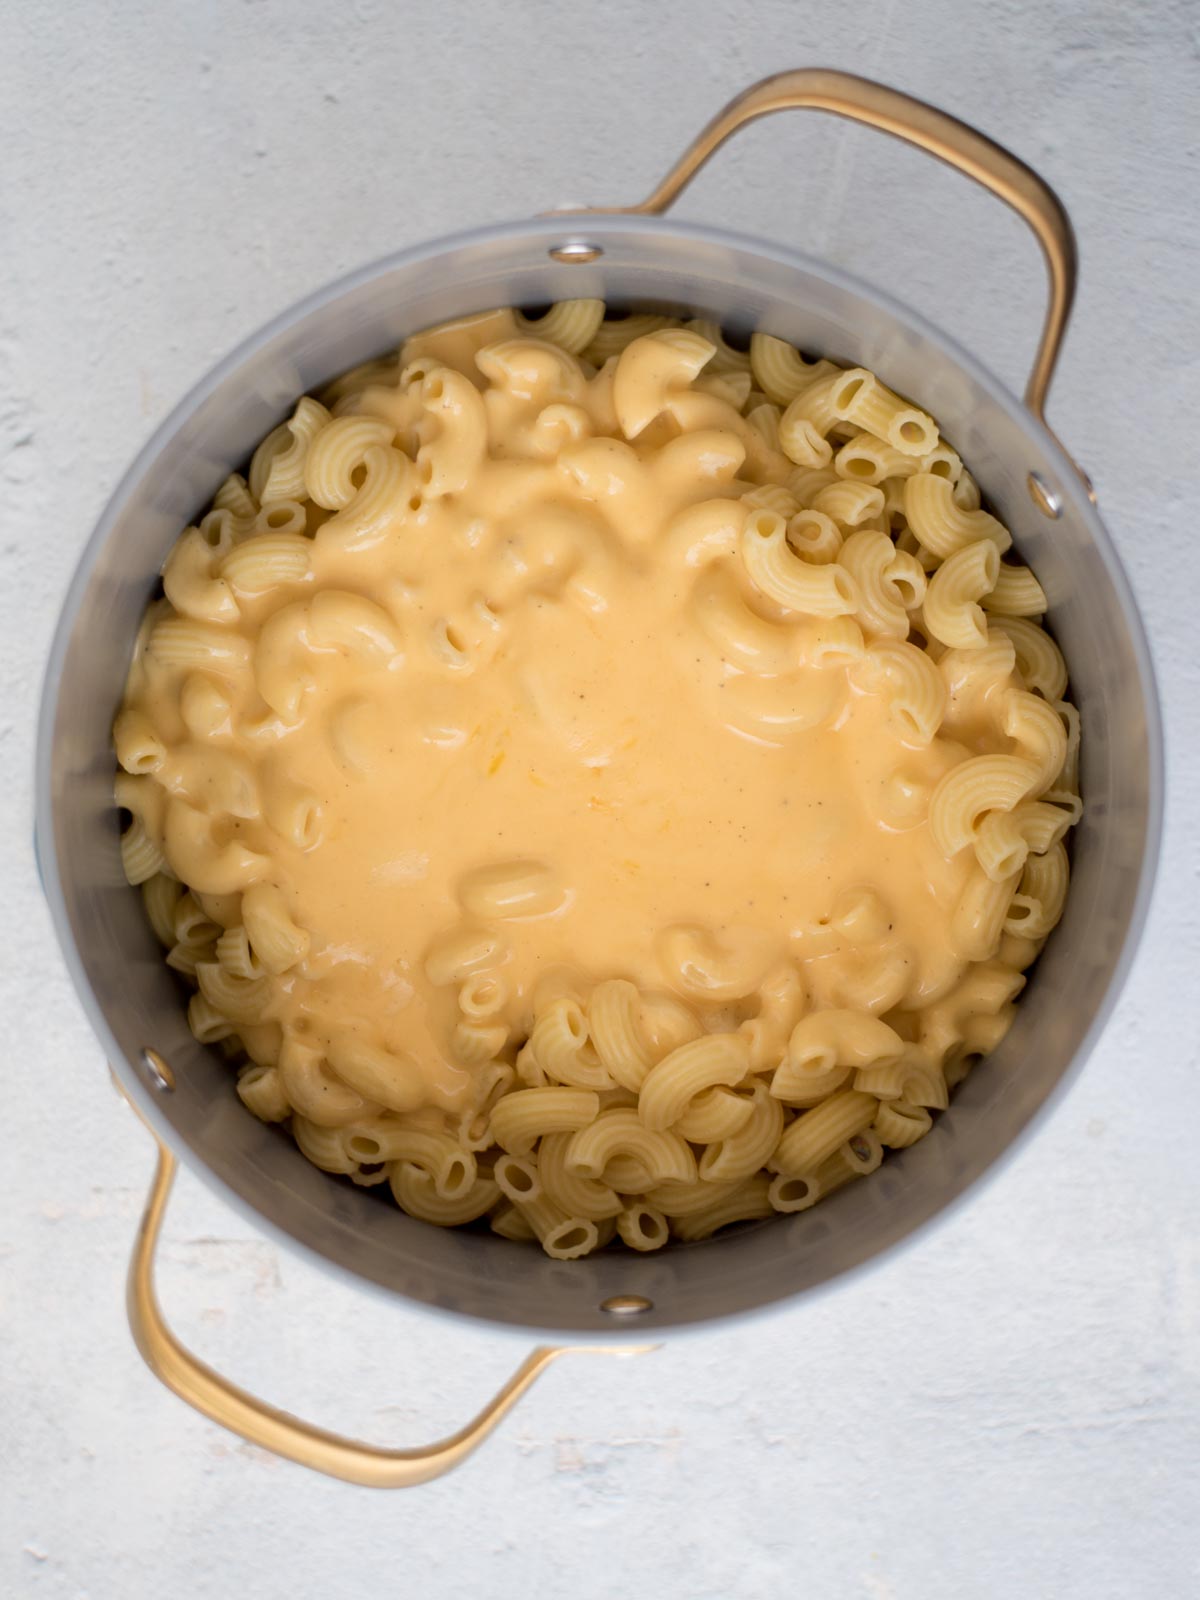 Cheese sauce placed over cooked pasta in a saucepan.